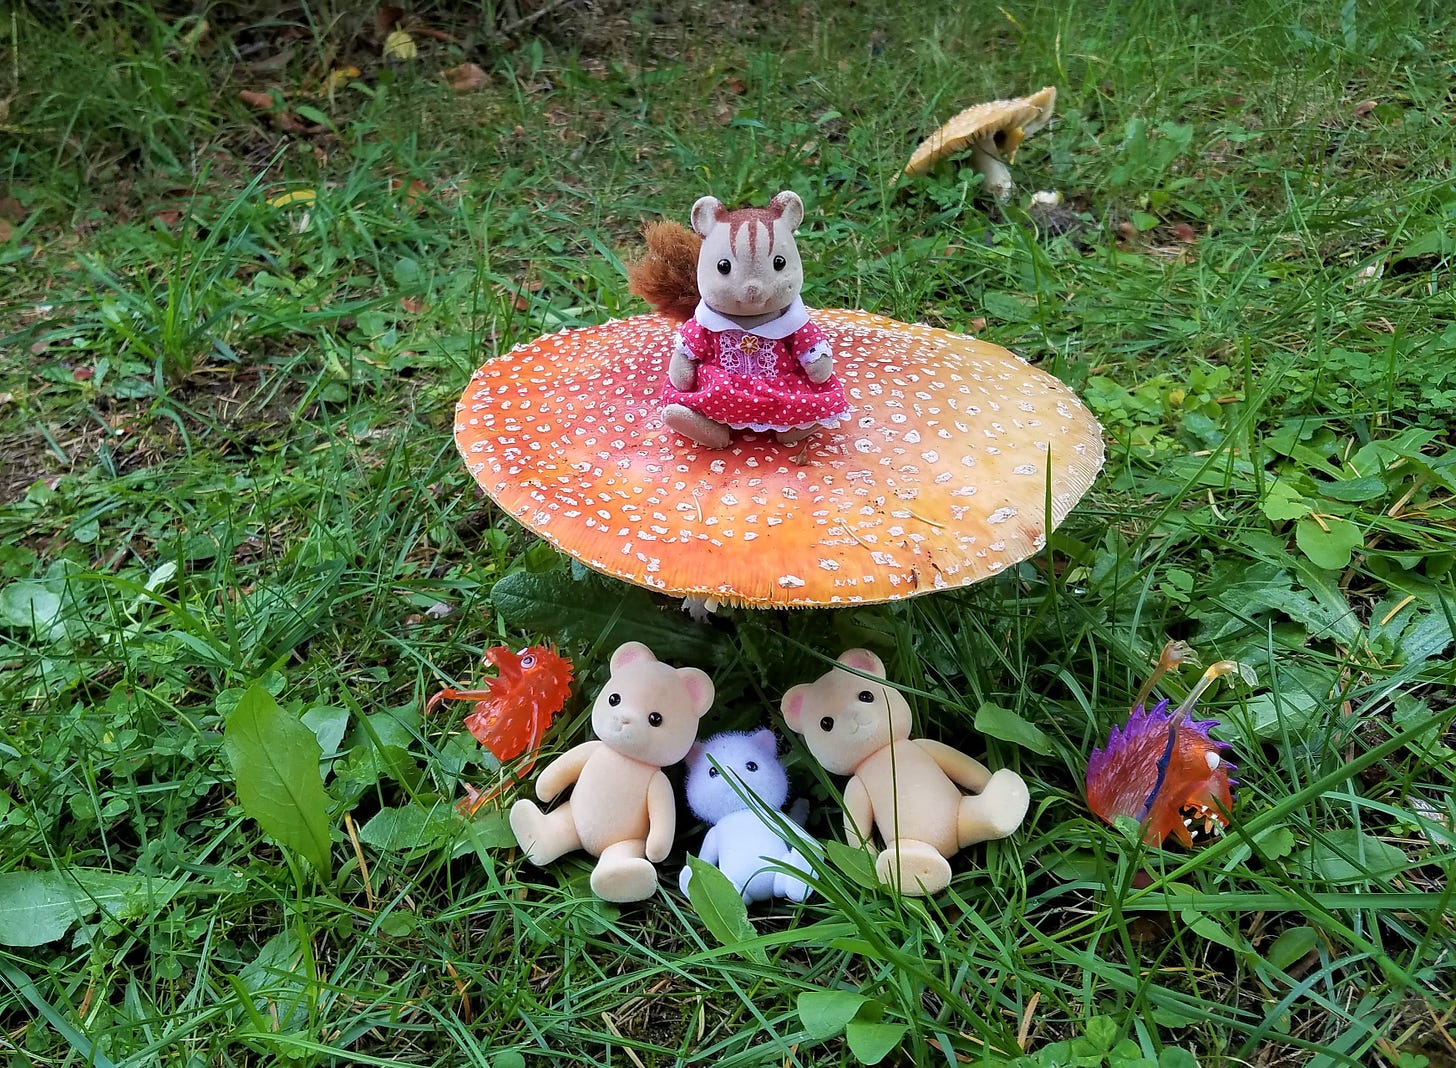 A red and white amanita muscaria mushroom with little toys arranged around it